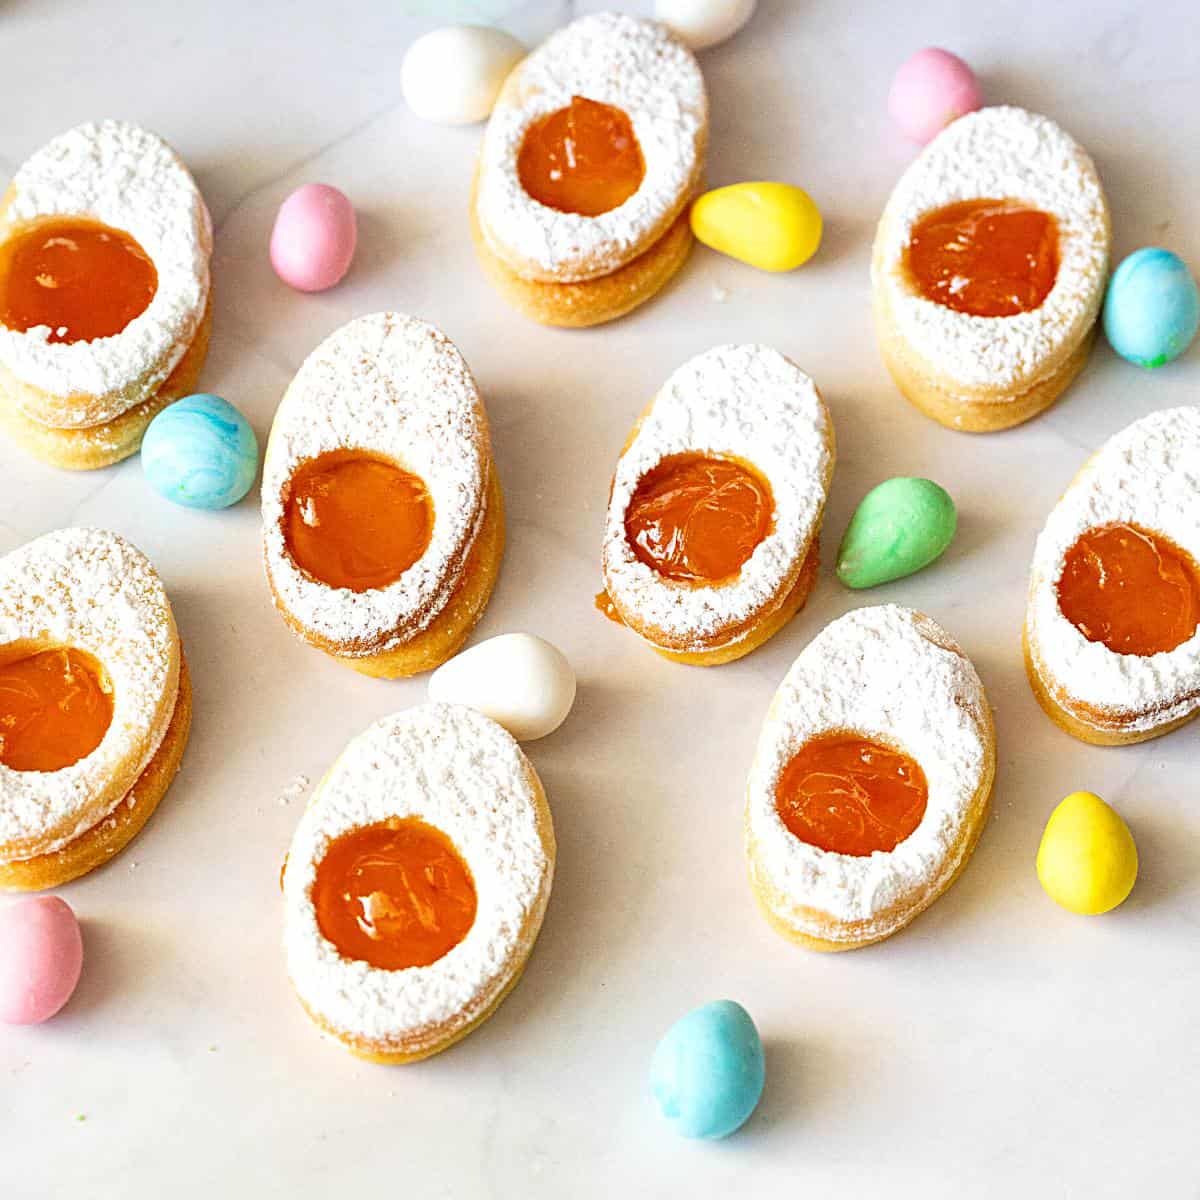 Egg shaped cookies with apricot jam.